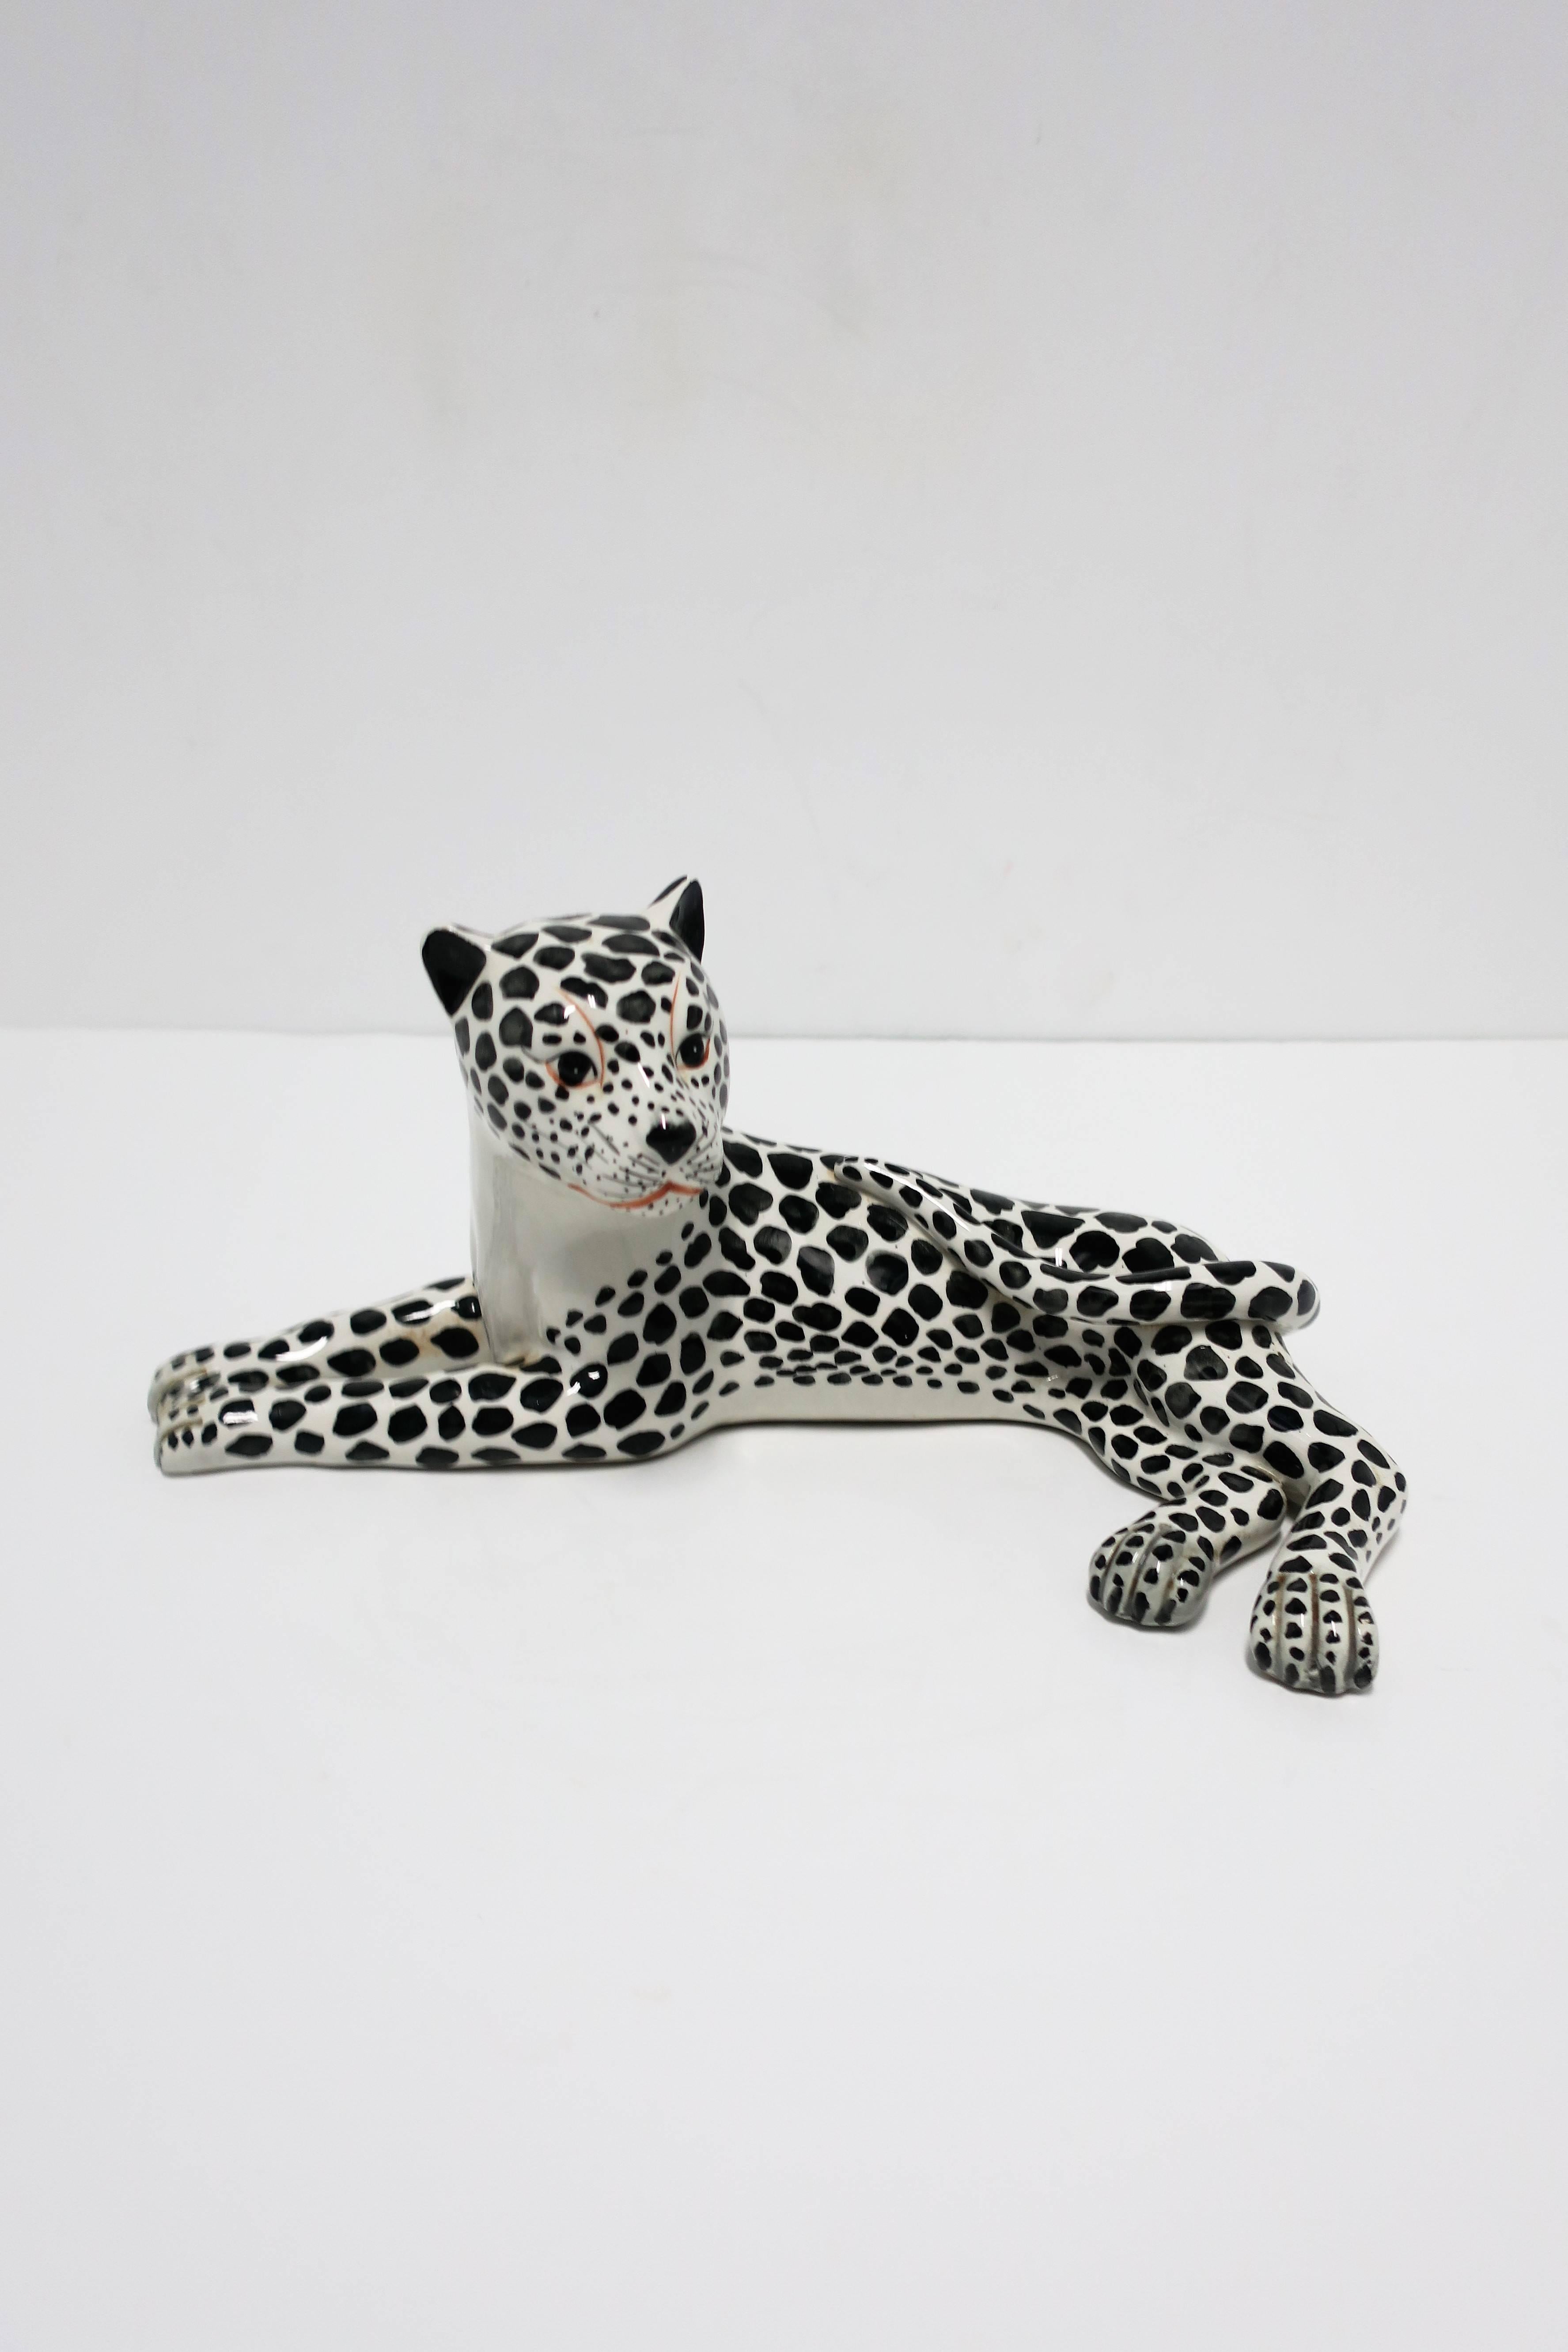 A beautiful, striking, and relatively large vintage Italian black and white cheetah or leopard animal cat sculpture, circa 1970s, Italy. Made in Italy. Marked 'Italy' on bottom as show in image #10. 

Measurements include: 5.25